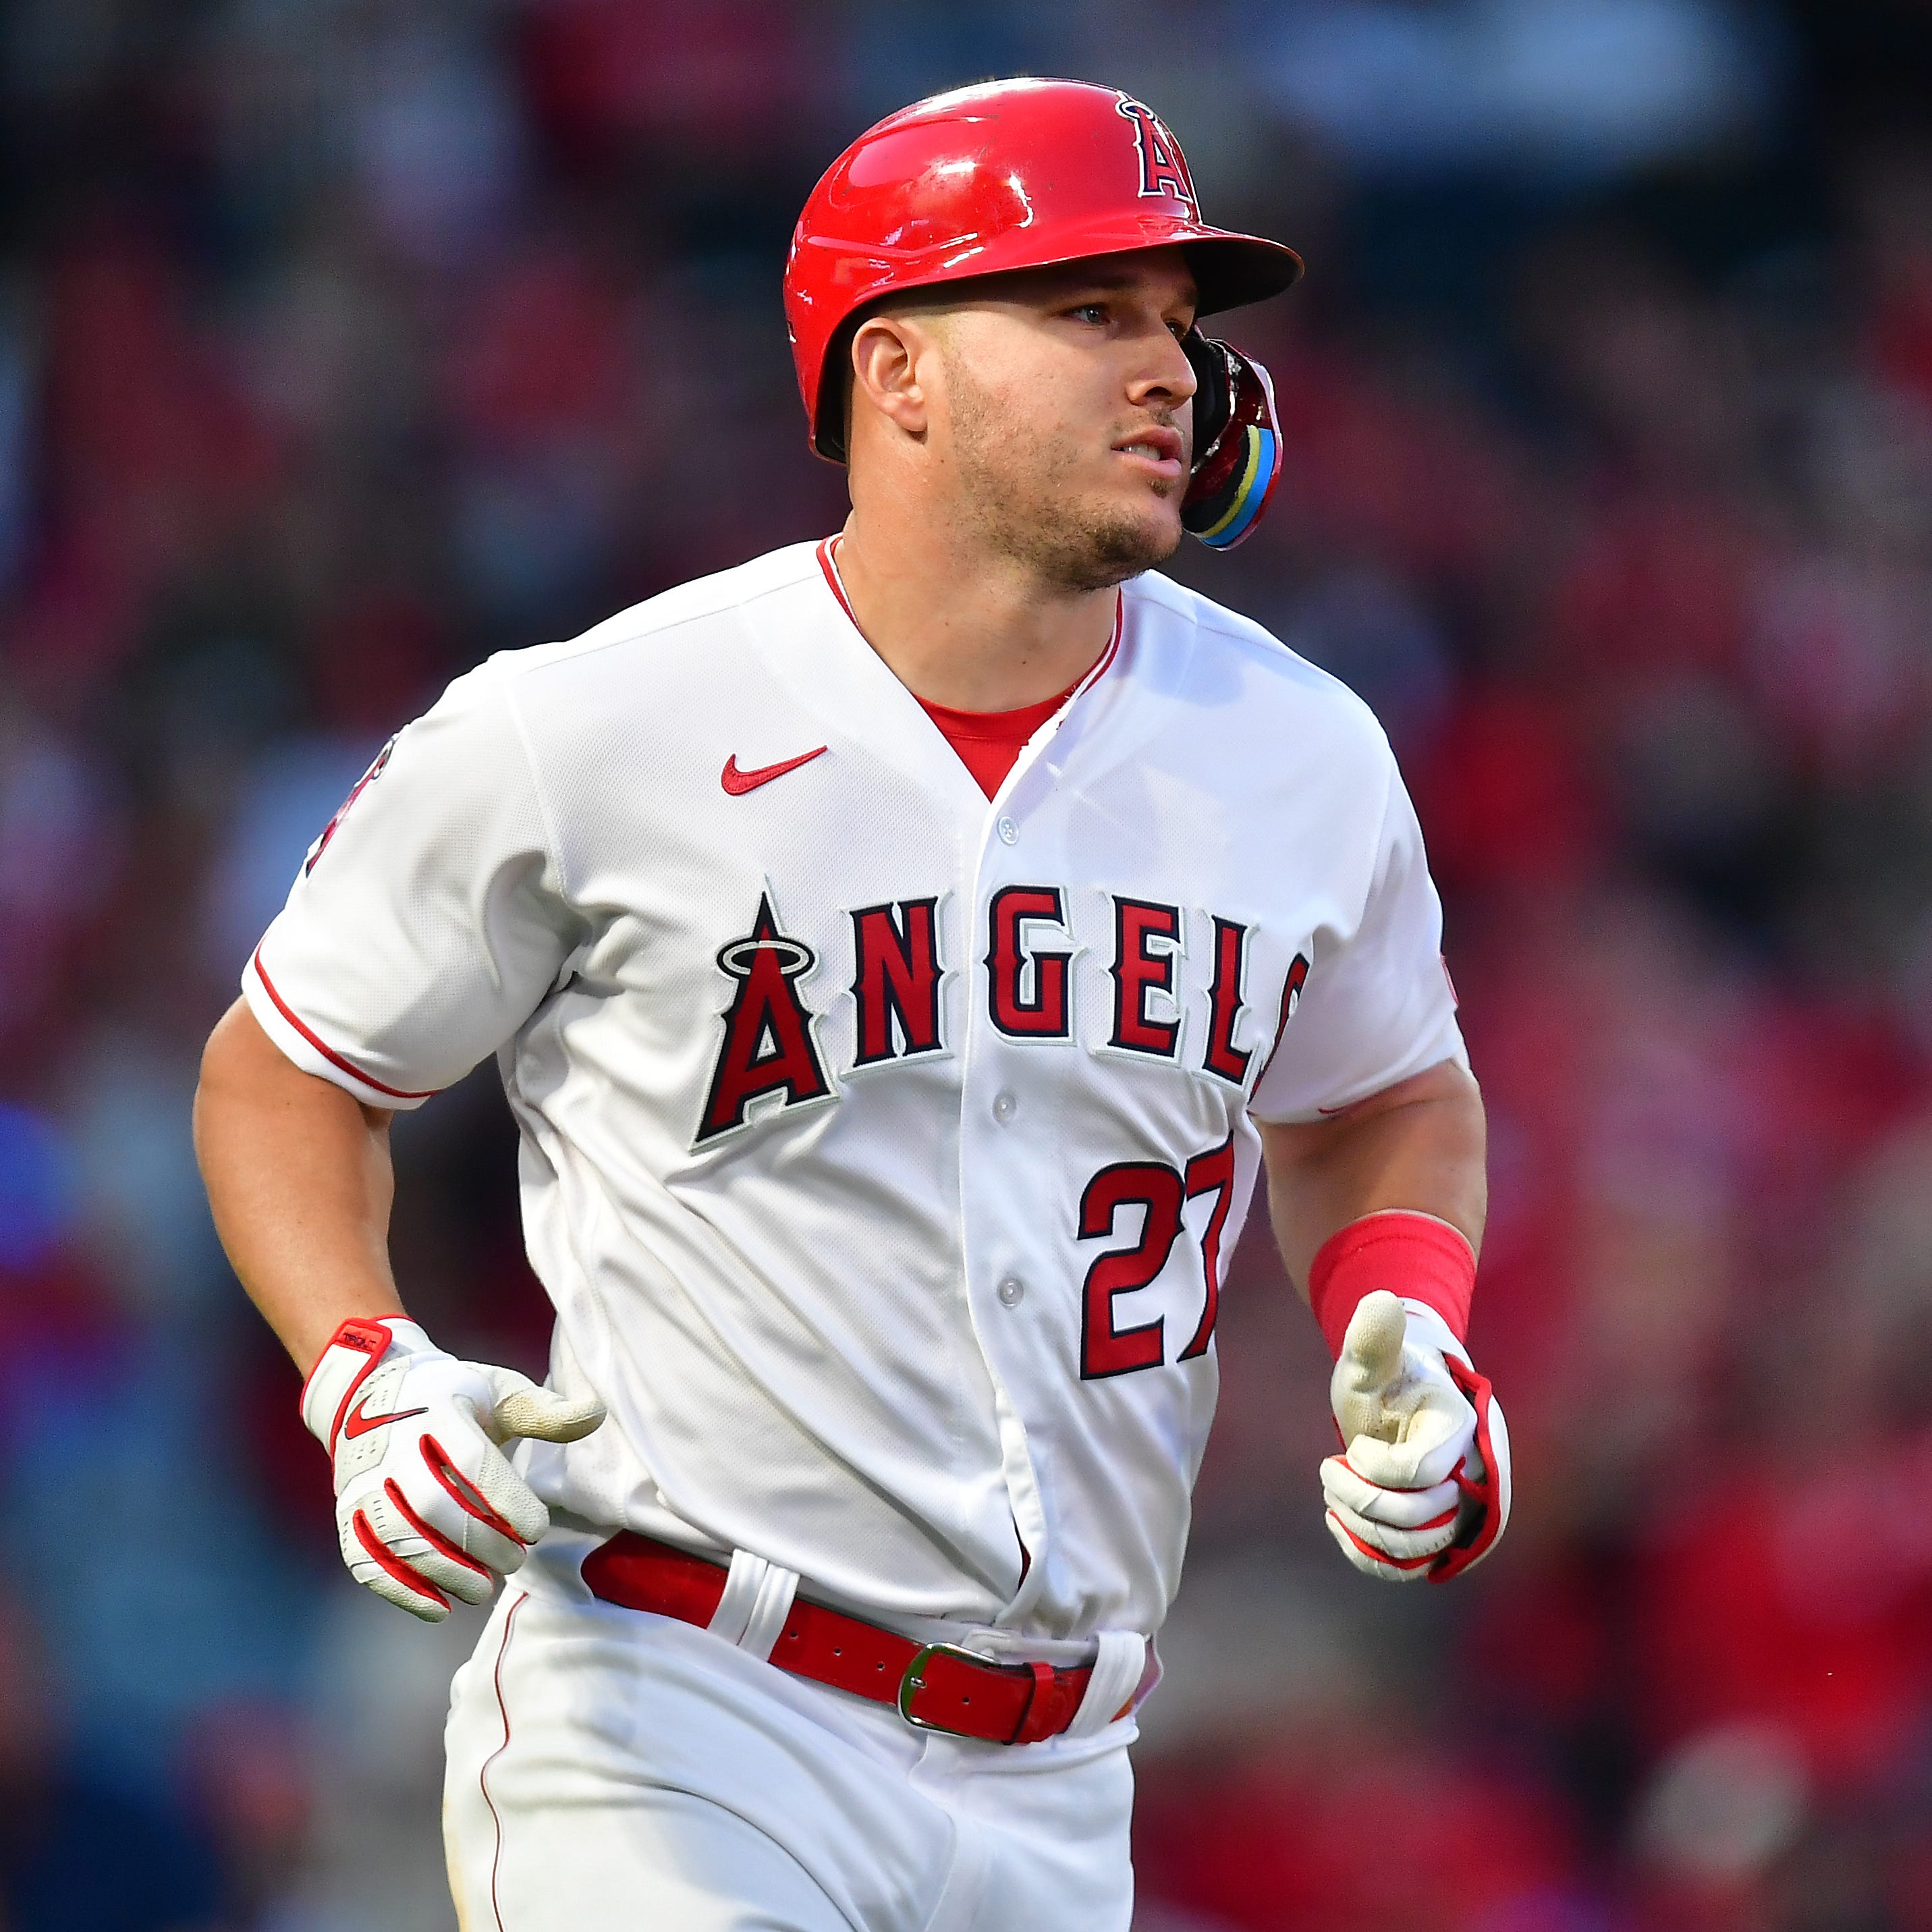 Los Angeles Angels center fielder Mike Trout has 10 home runs this season.